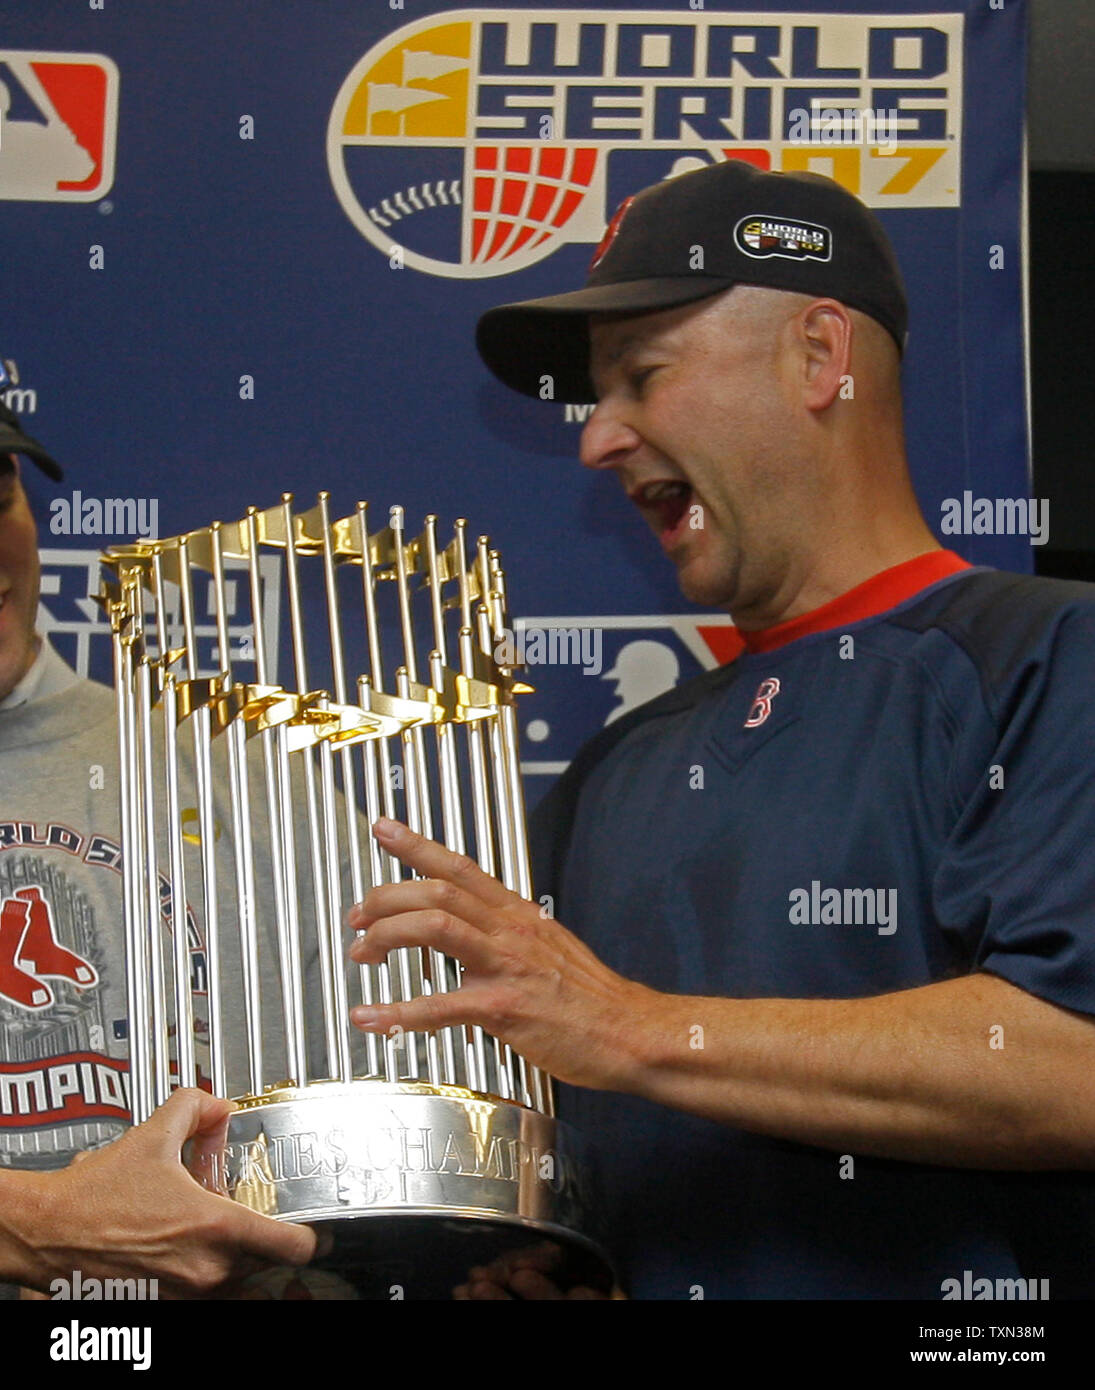 Boston Red Sox manager Terry Francona holds the World Series trophy after  the World Series game four at Coors Field in Denver on October 28, 2007.  The Boston Red Sox beat the